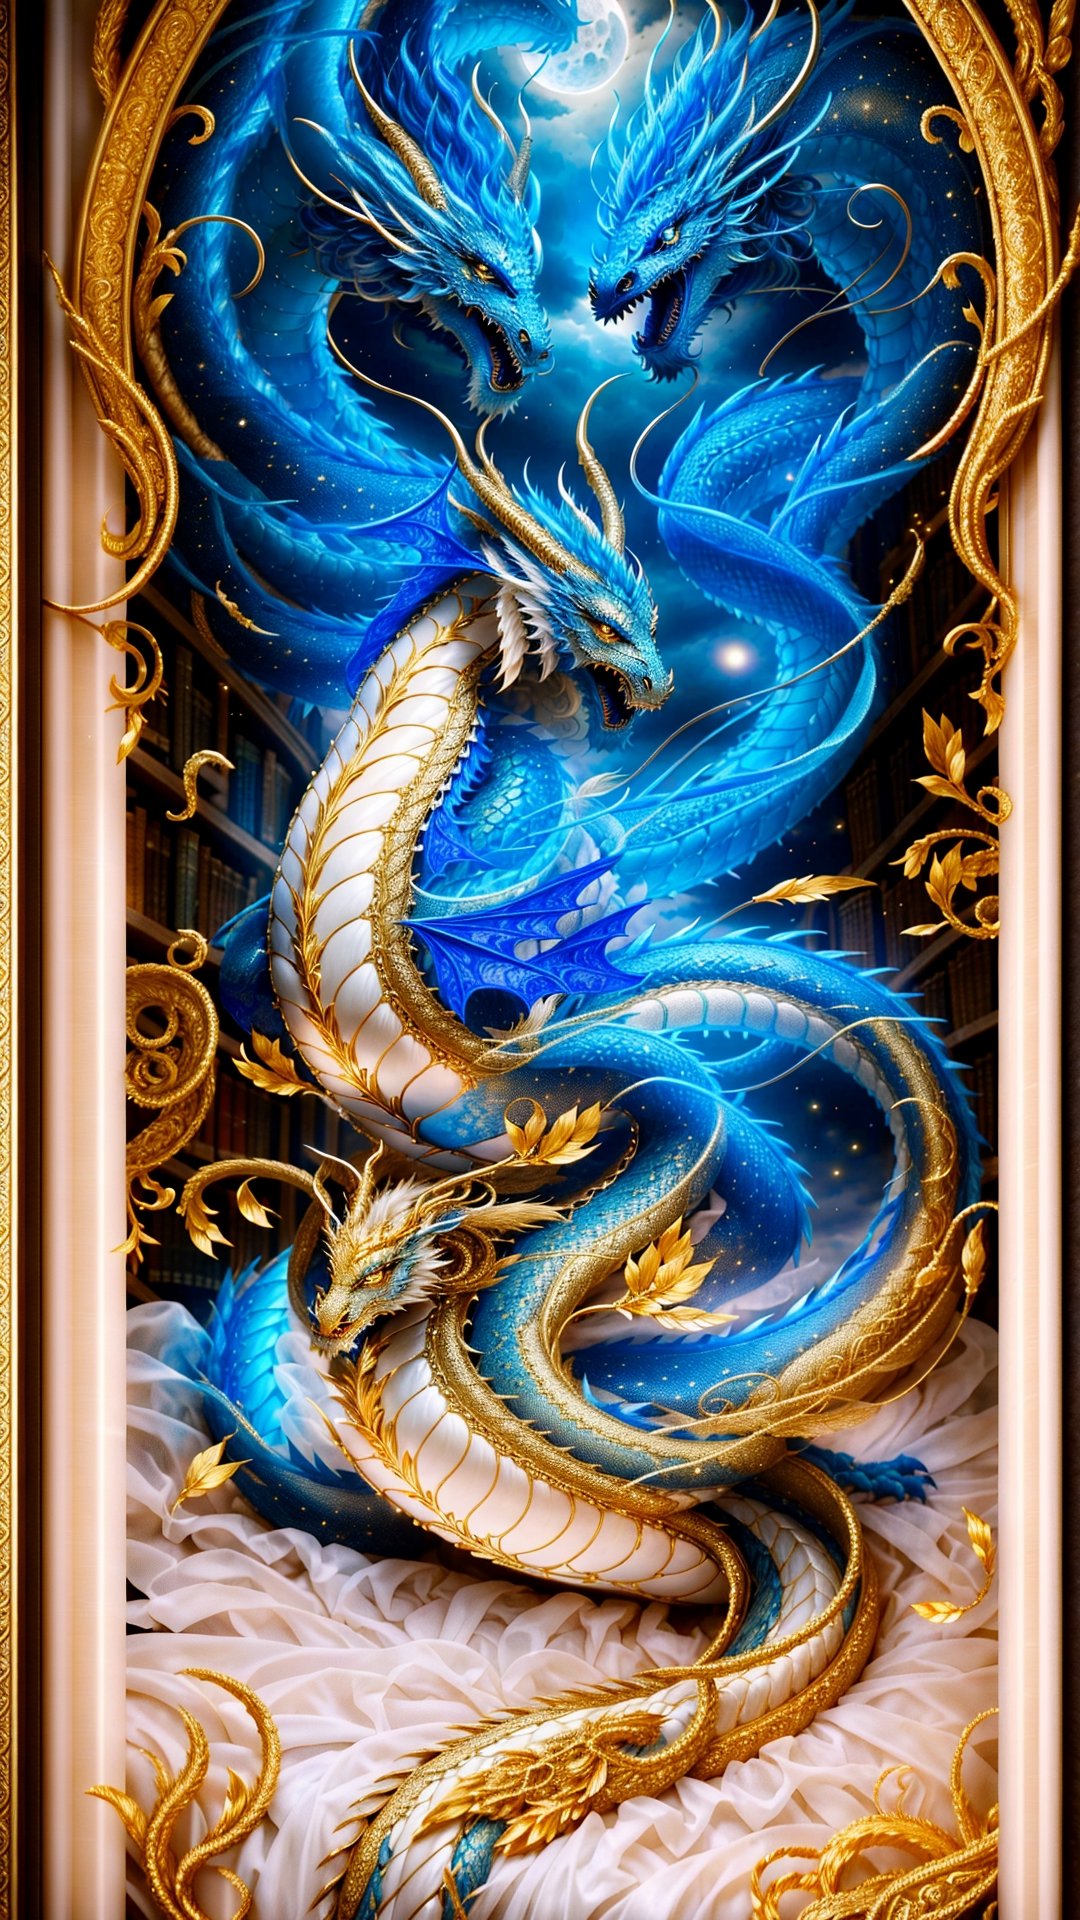 An ancient library bathed in moonlight, where a woman in an ivory gown whispers ancient tales. The gown's delicate embroidery depicts serpentine dragons in thread of gold, their tails trailing into the folds of the fabric. As she turns a page, the dragon's eyes seem to glimmer with a life of their own. Surreal, evocative, detailed, high resolution.